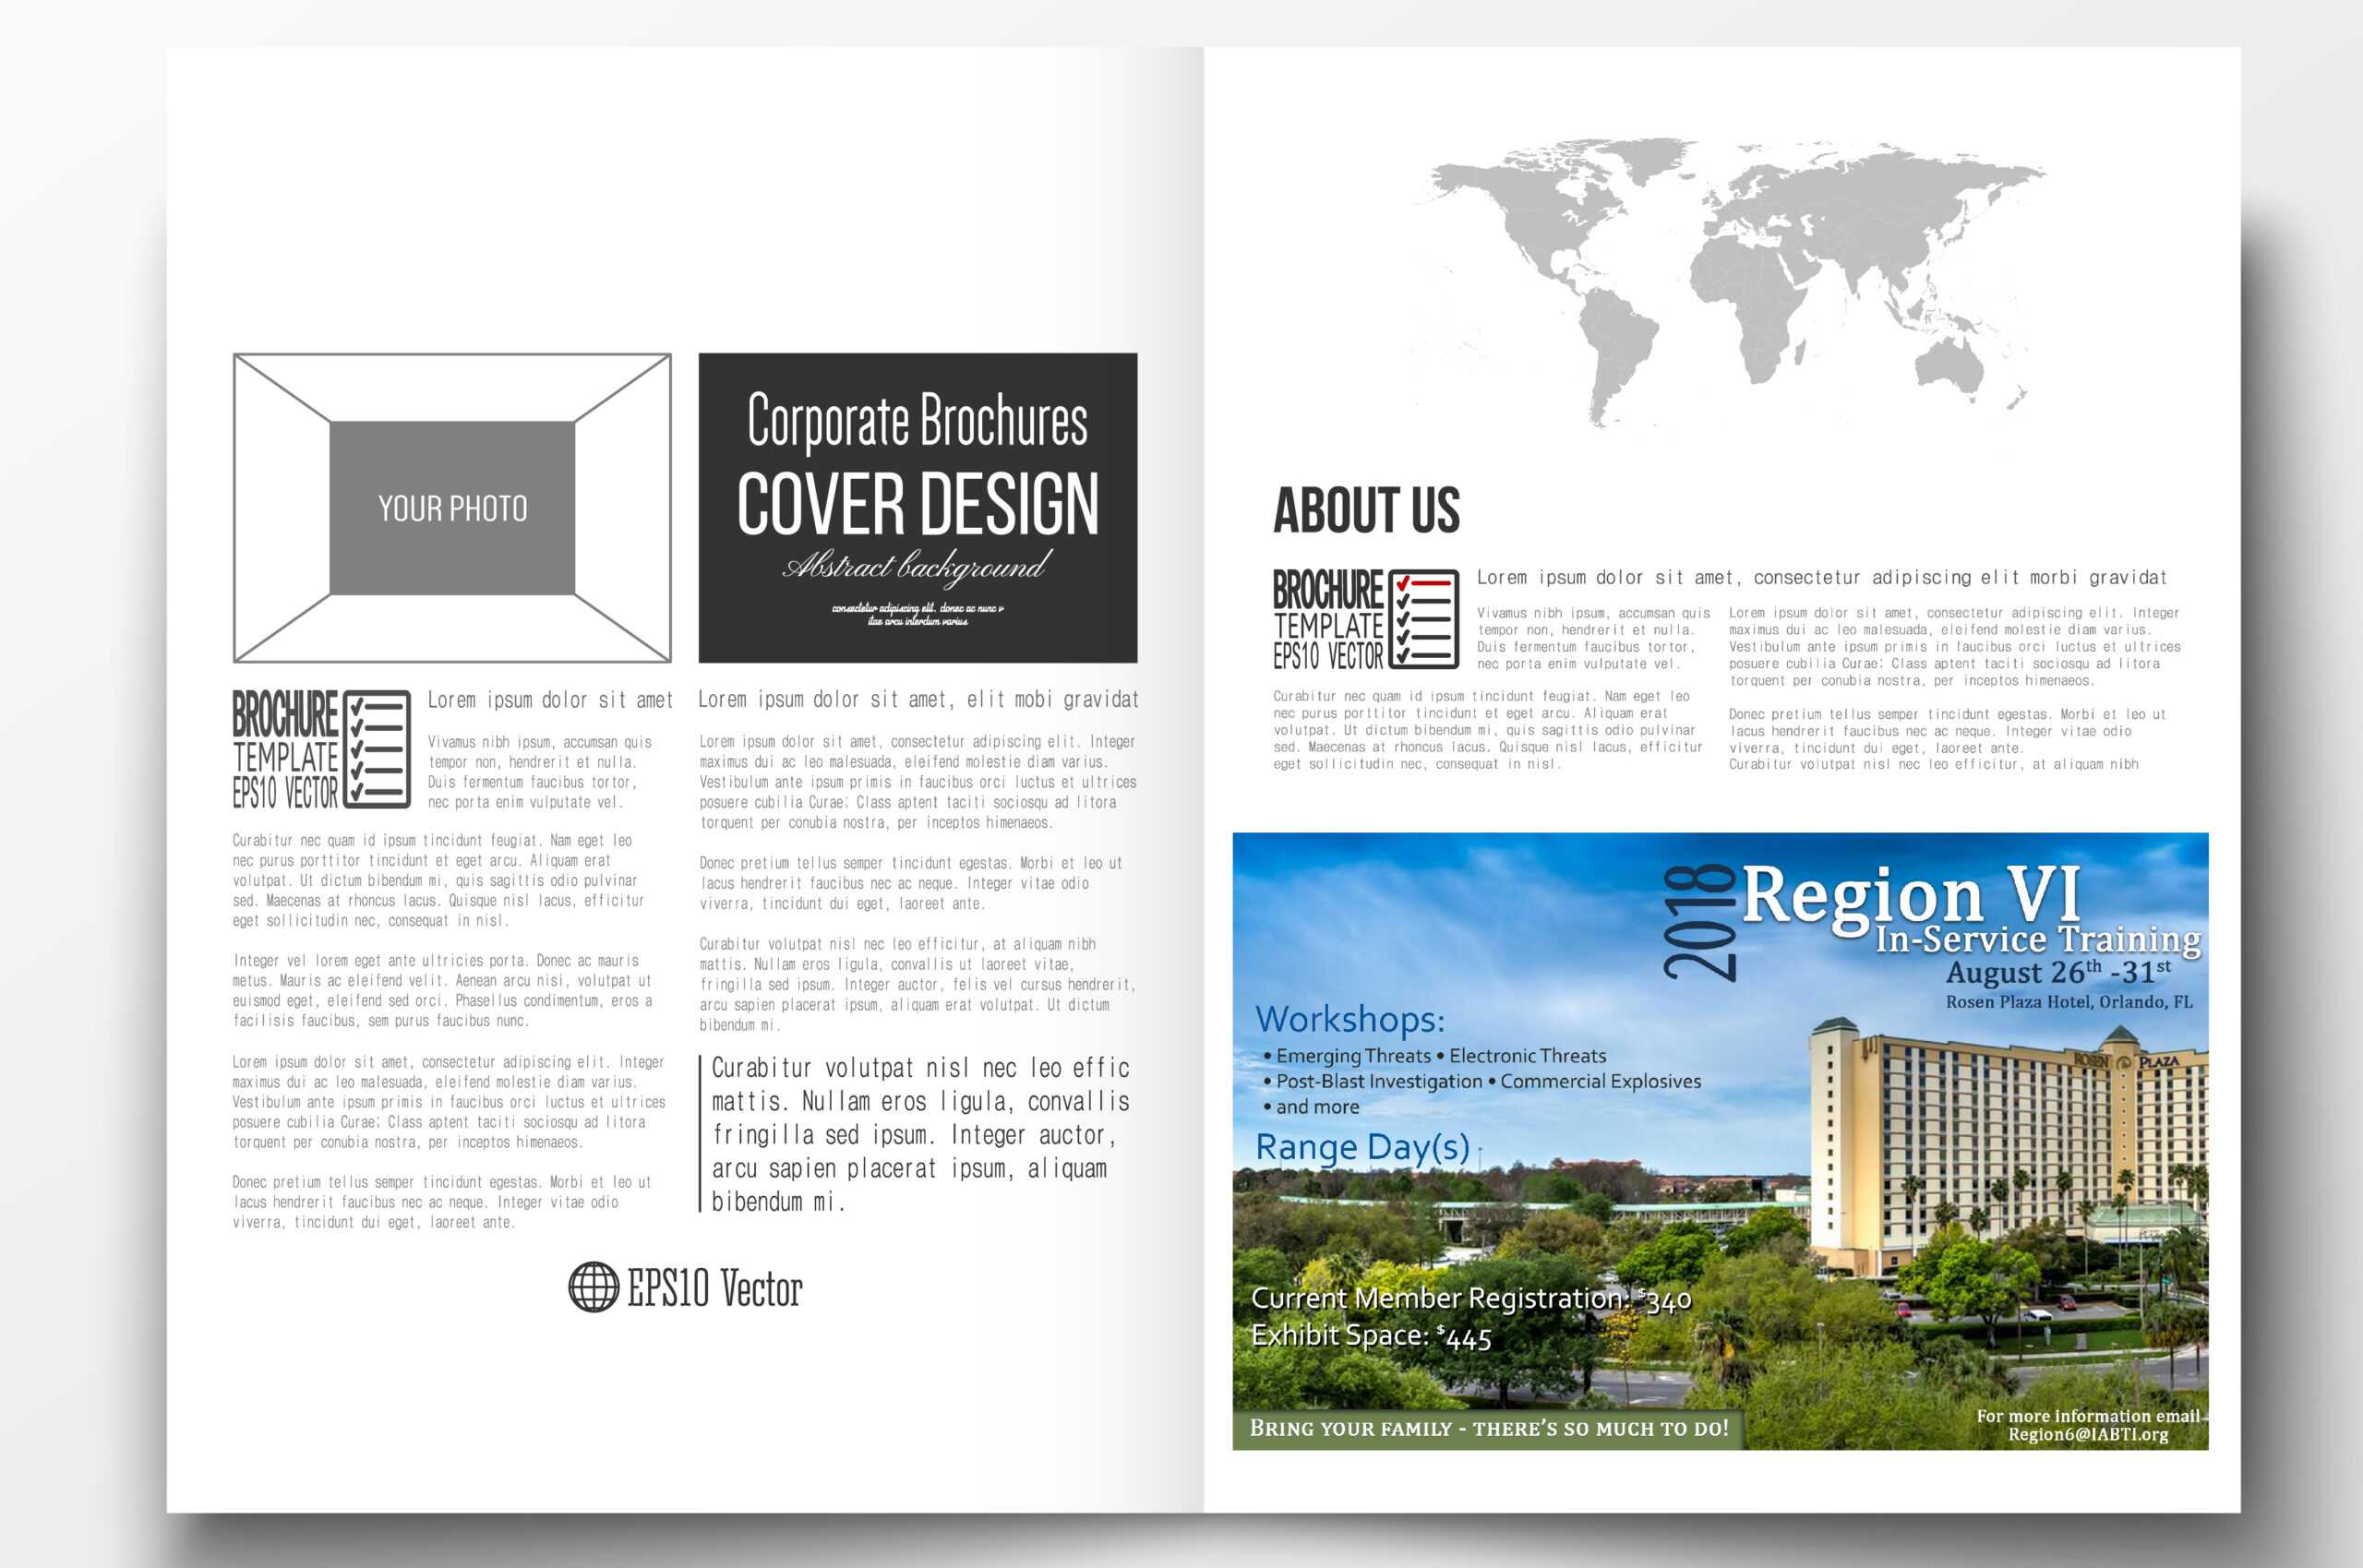 027 Half Page Template Ideas Regioni6Ad Stupendous Ad Free Within Magazine Ad Template Word